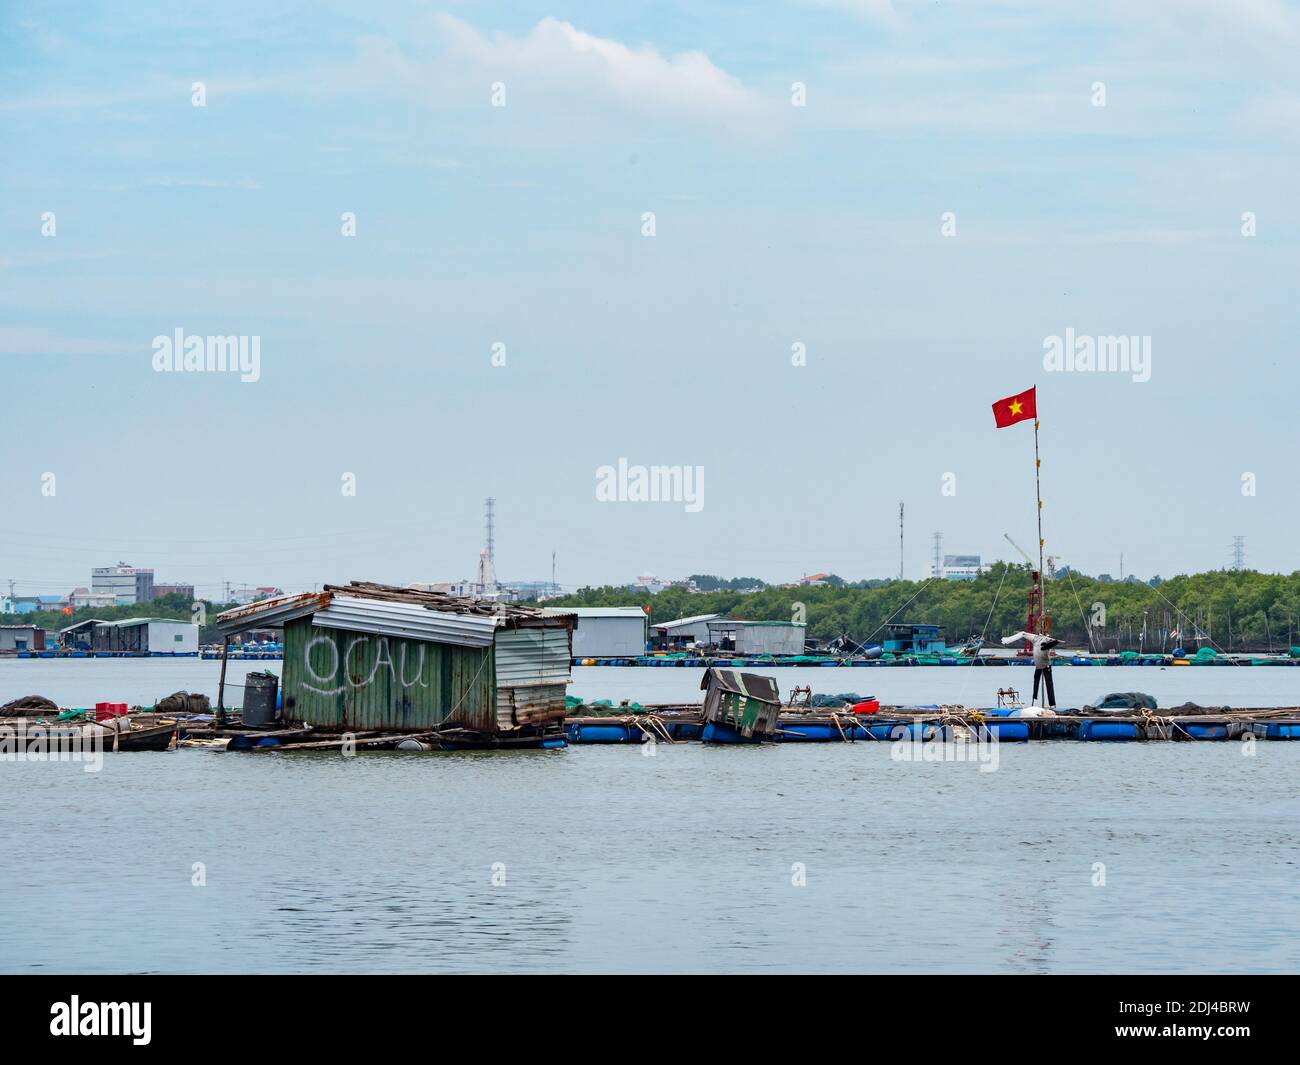 Fish farms on Dinh River near Vung Tau in the Bang Ria-Vung Tau Province of South Vietnam. Industrial areas in the background. Stock Photo